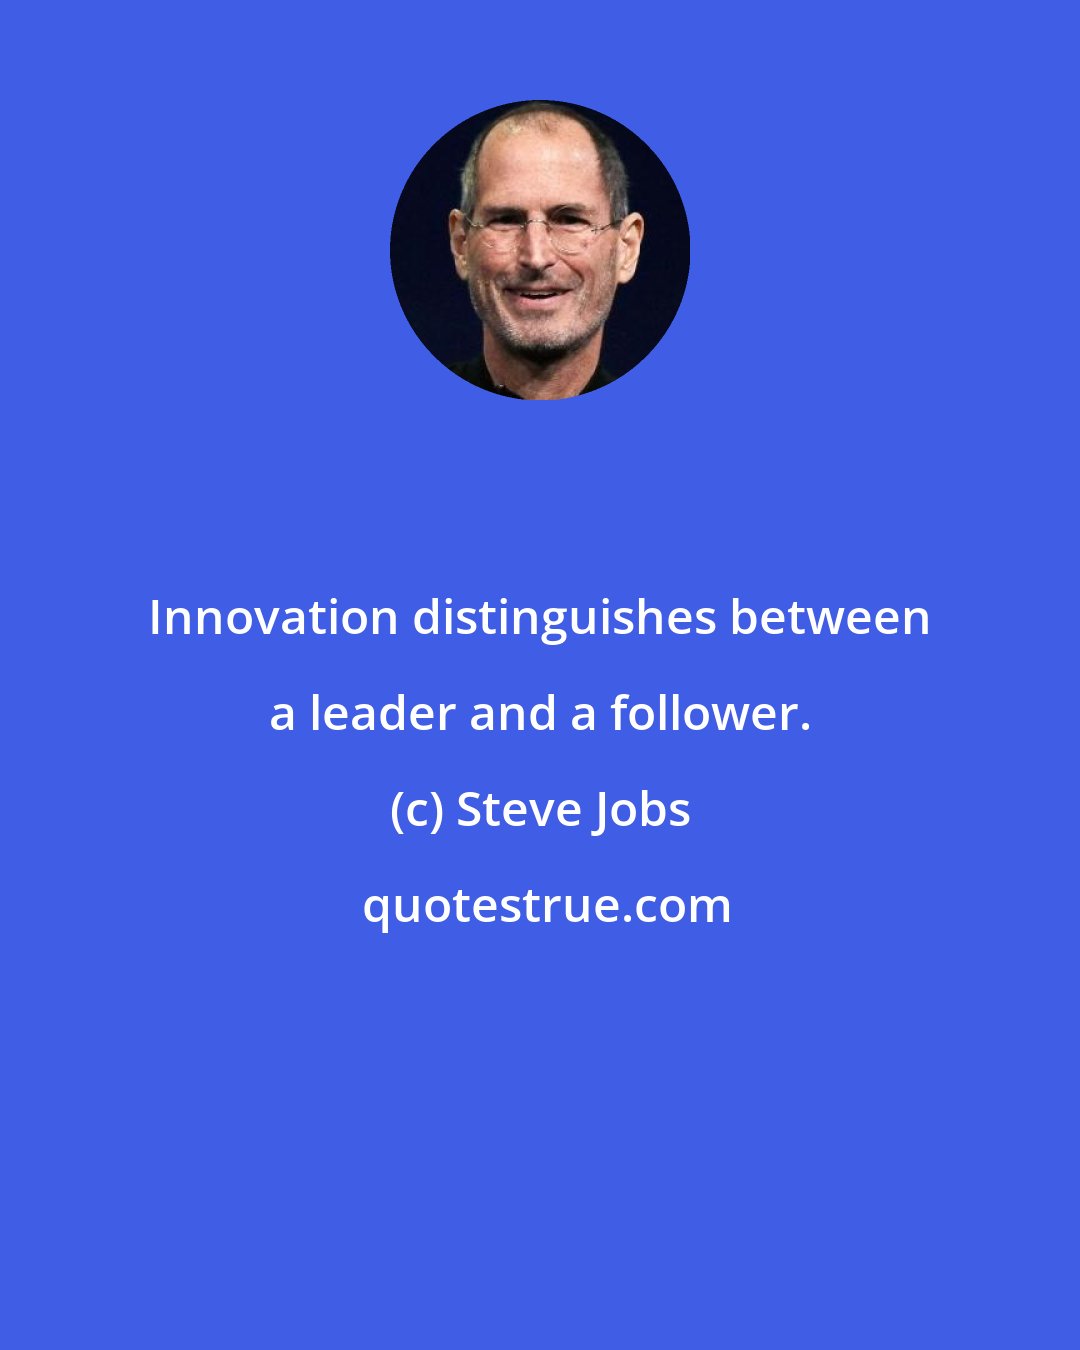 Steve Jobs: Innovation distinguishes between a leader and a follower.